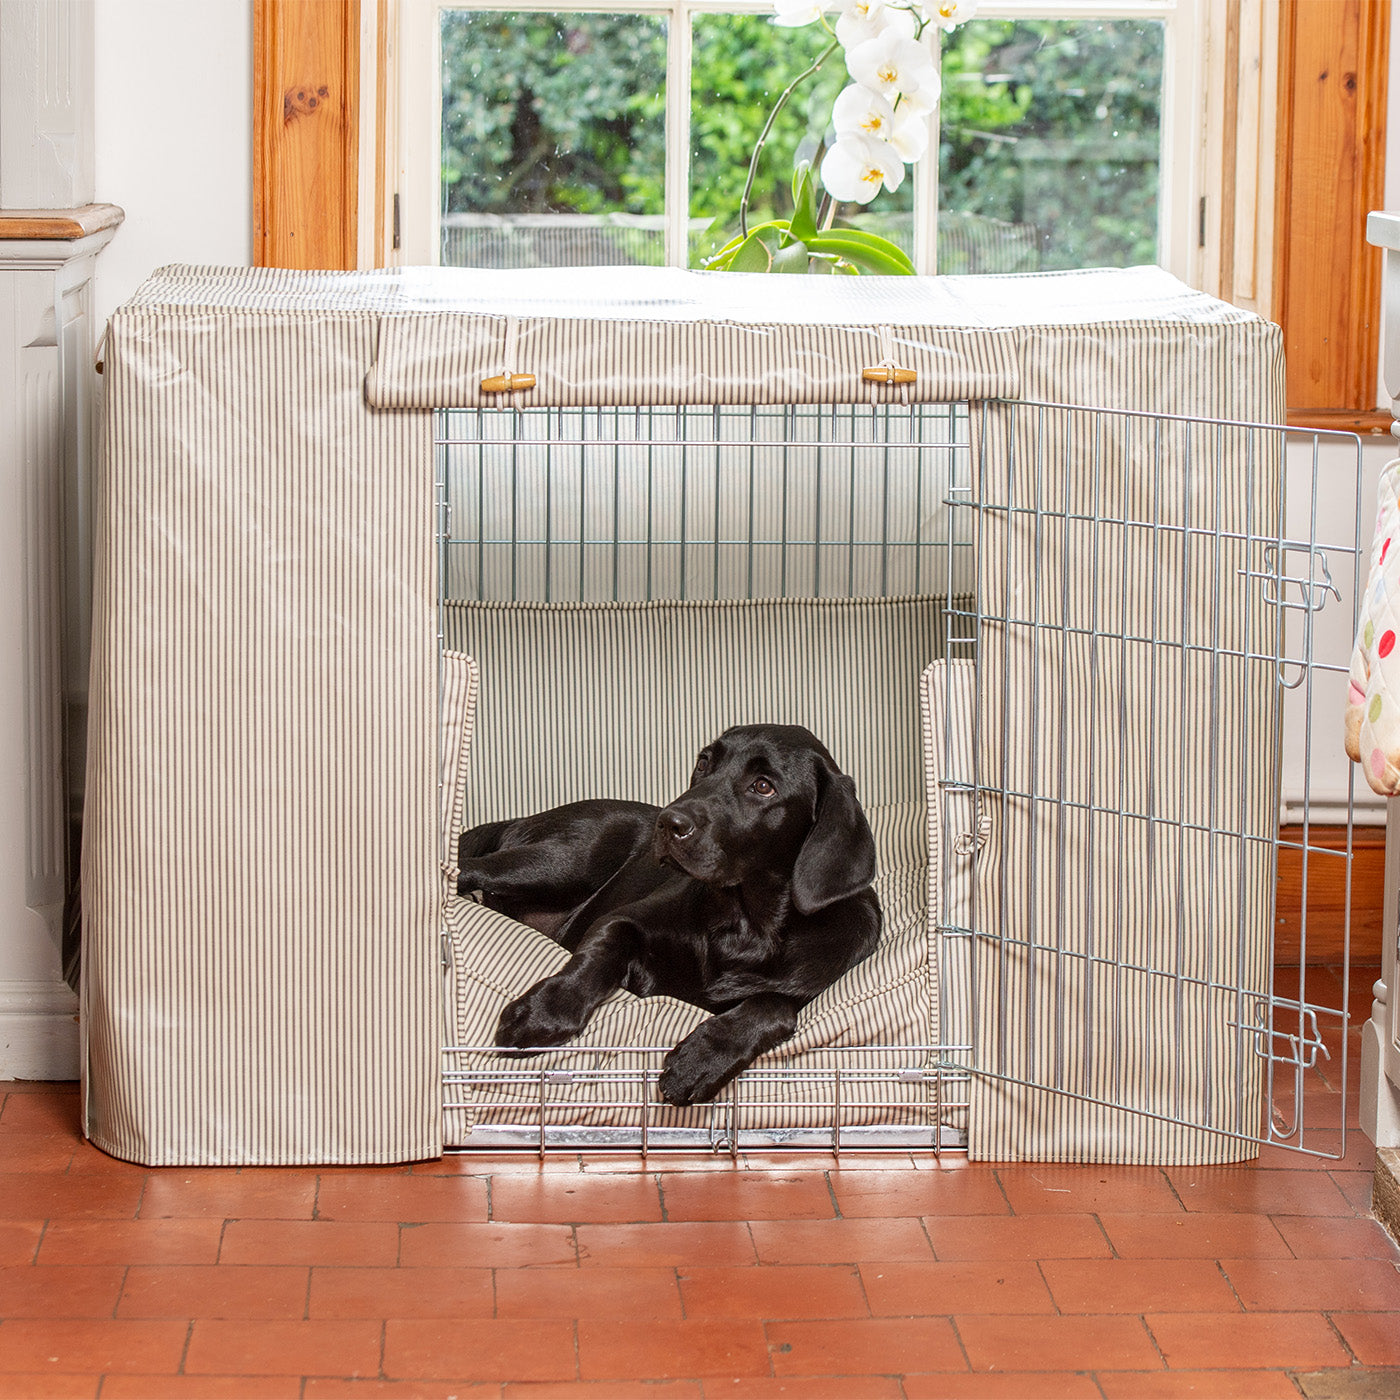 Luxury Silver Dog Cage Set With Cushion, Bumper and Cage Cover,  In Regency Stripe Oil Cloth. The Perfect Dog Cage For The Ultimate Naptime, Available Now at Lords & Labradors US